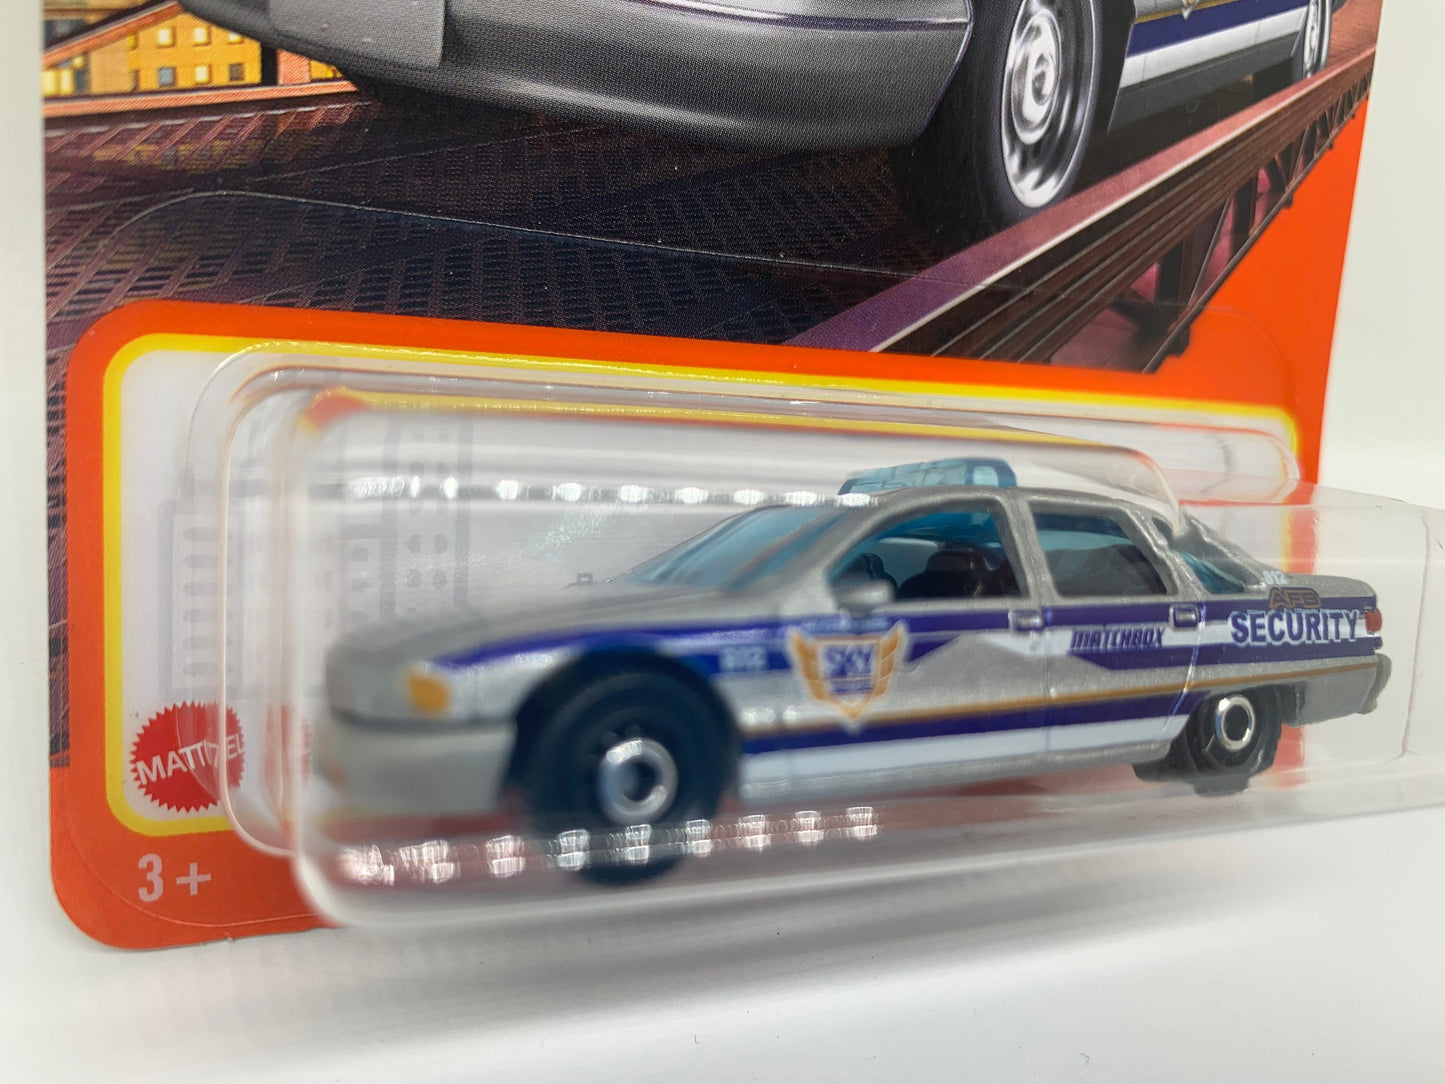 Matchbox Chevy Caprice Classic Police Silver MBX Metro Perfect Birthday Gift Miniature Collectable Model Toy Car